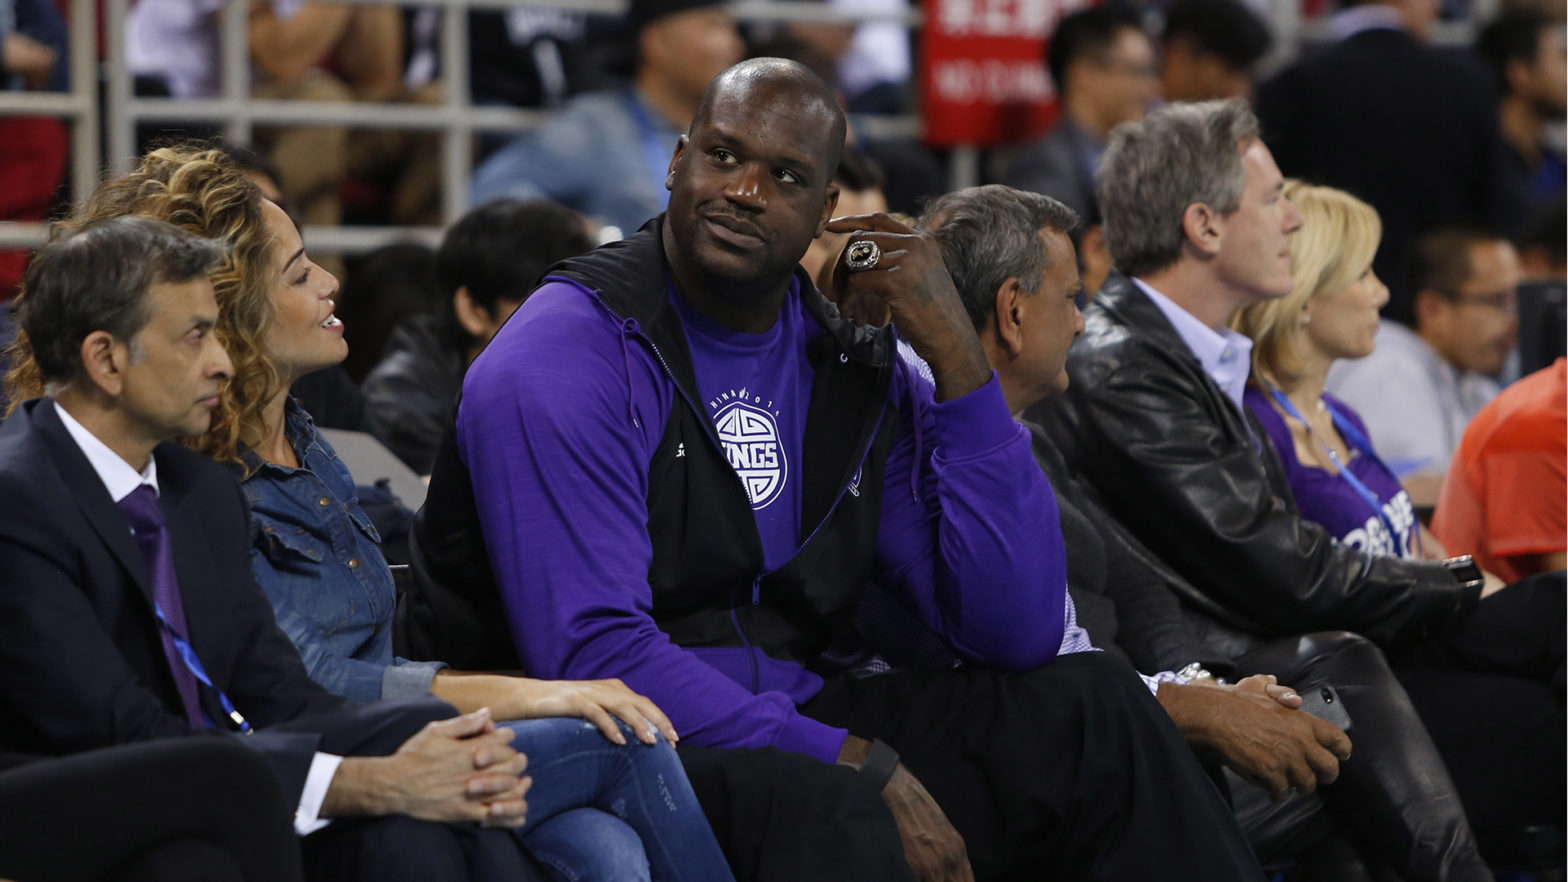 He's Built A $400M Fortune, But There Was Still A Time Where Shaquille O’Neal Thought 'D-mn, I'm Broke'